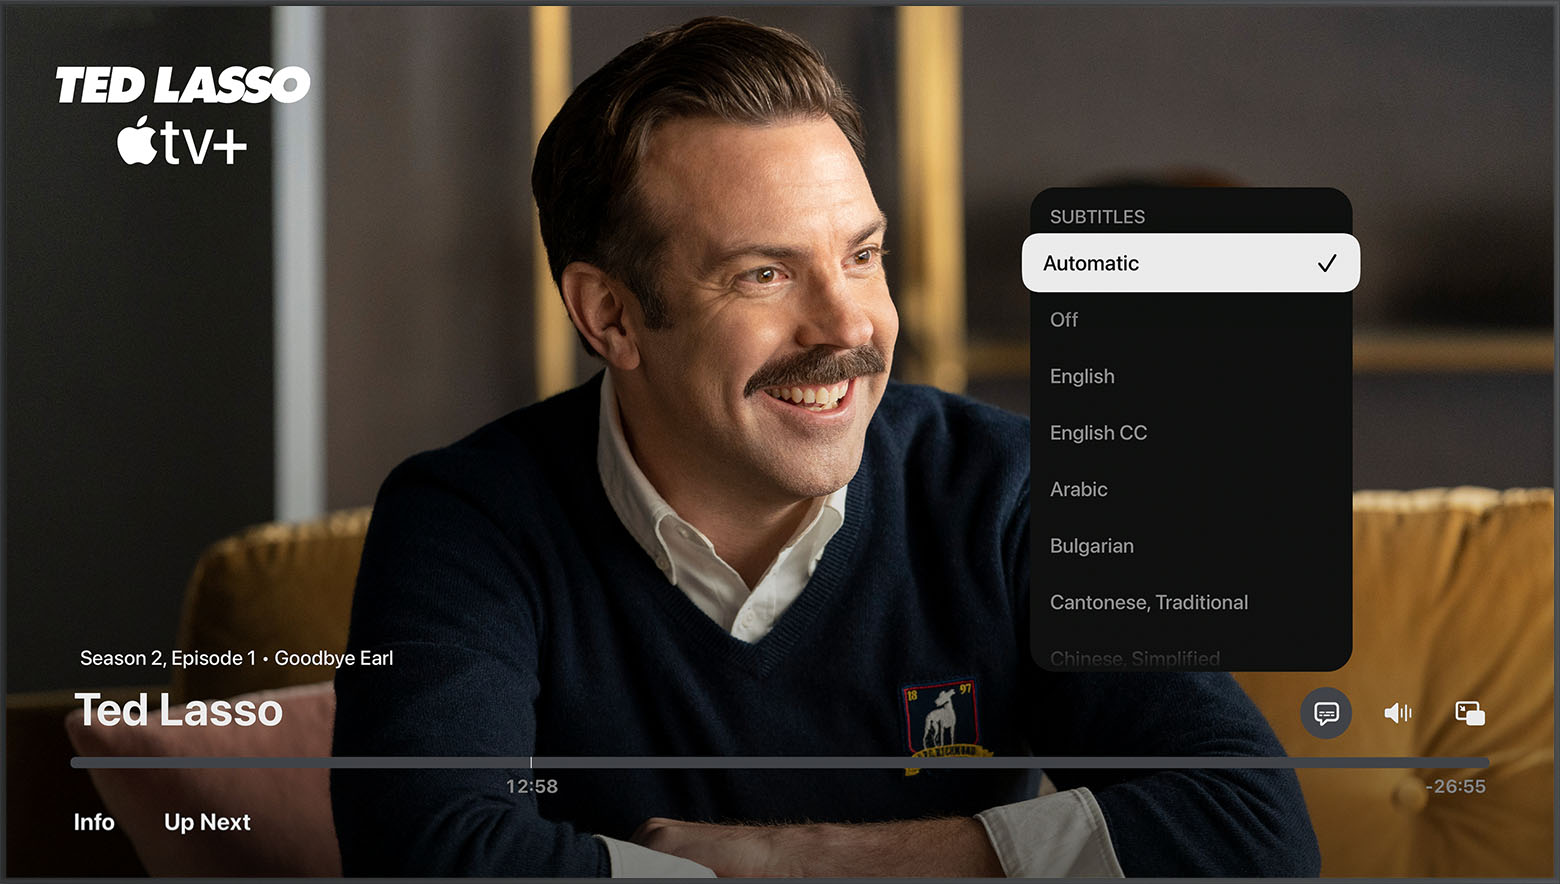 Subtitle options in the Apple TV app on Apple TV, smart TV, and streaming device